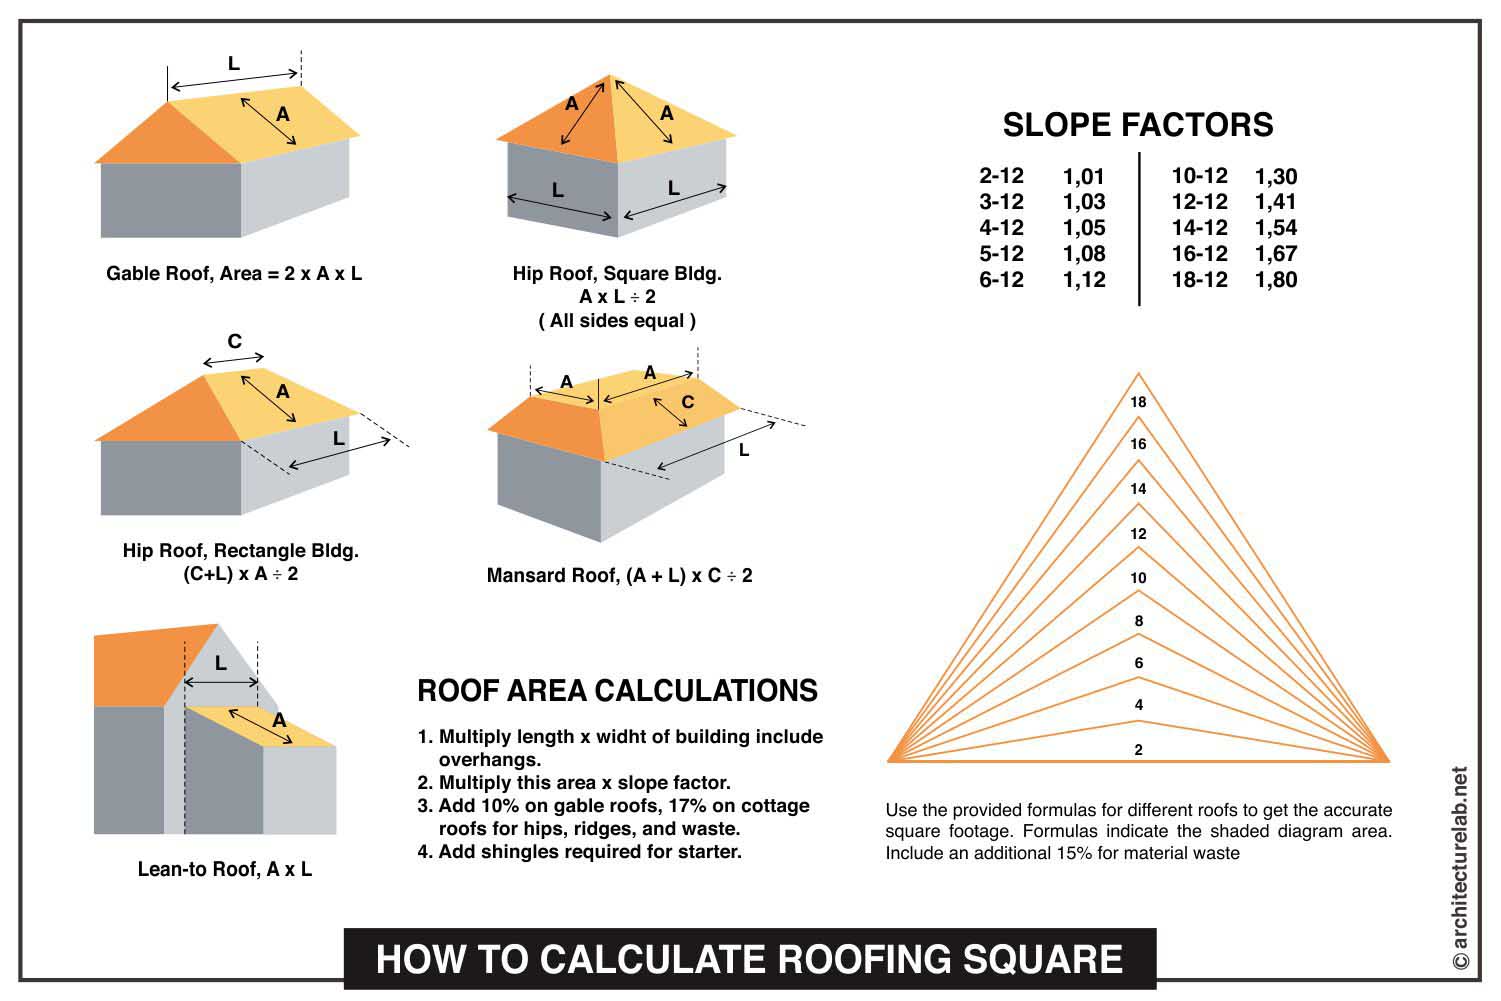 How to calculate roofing square